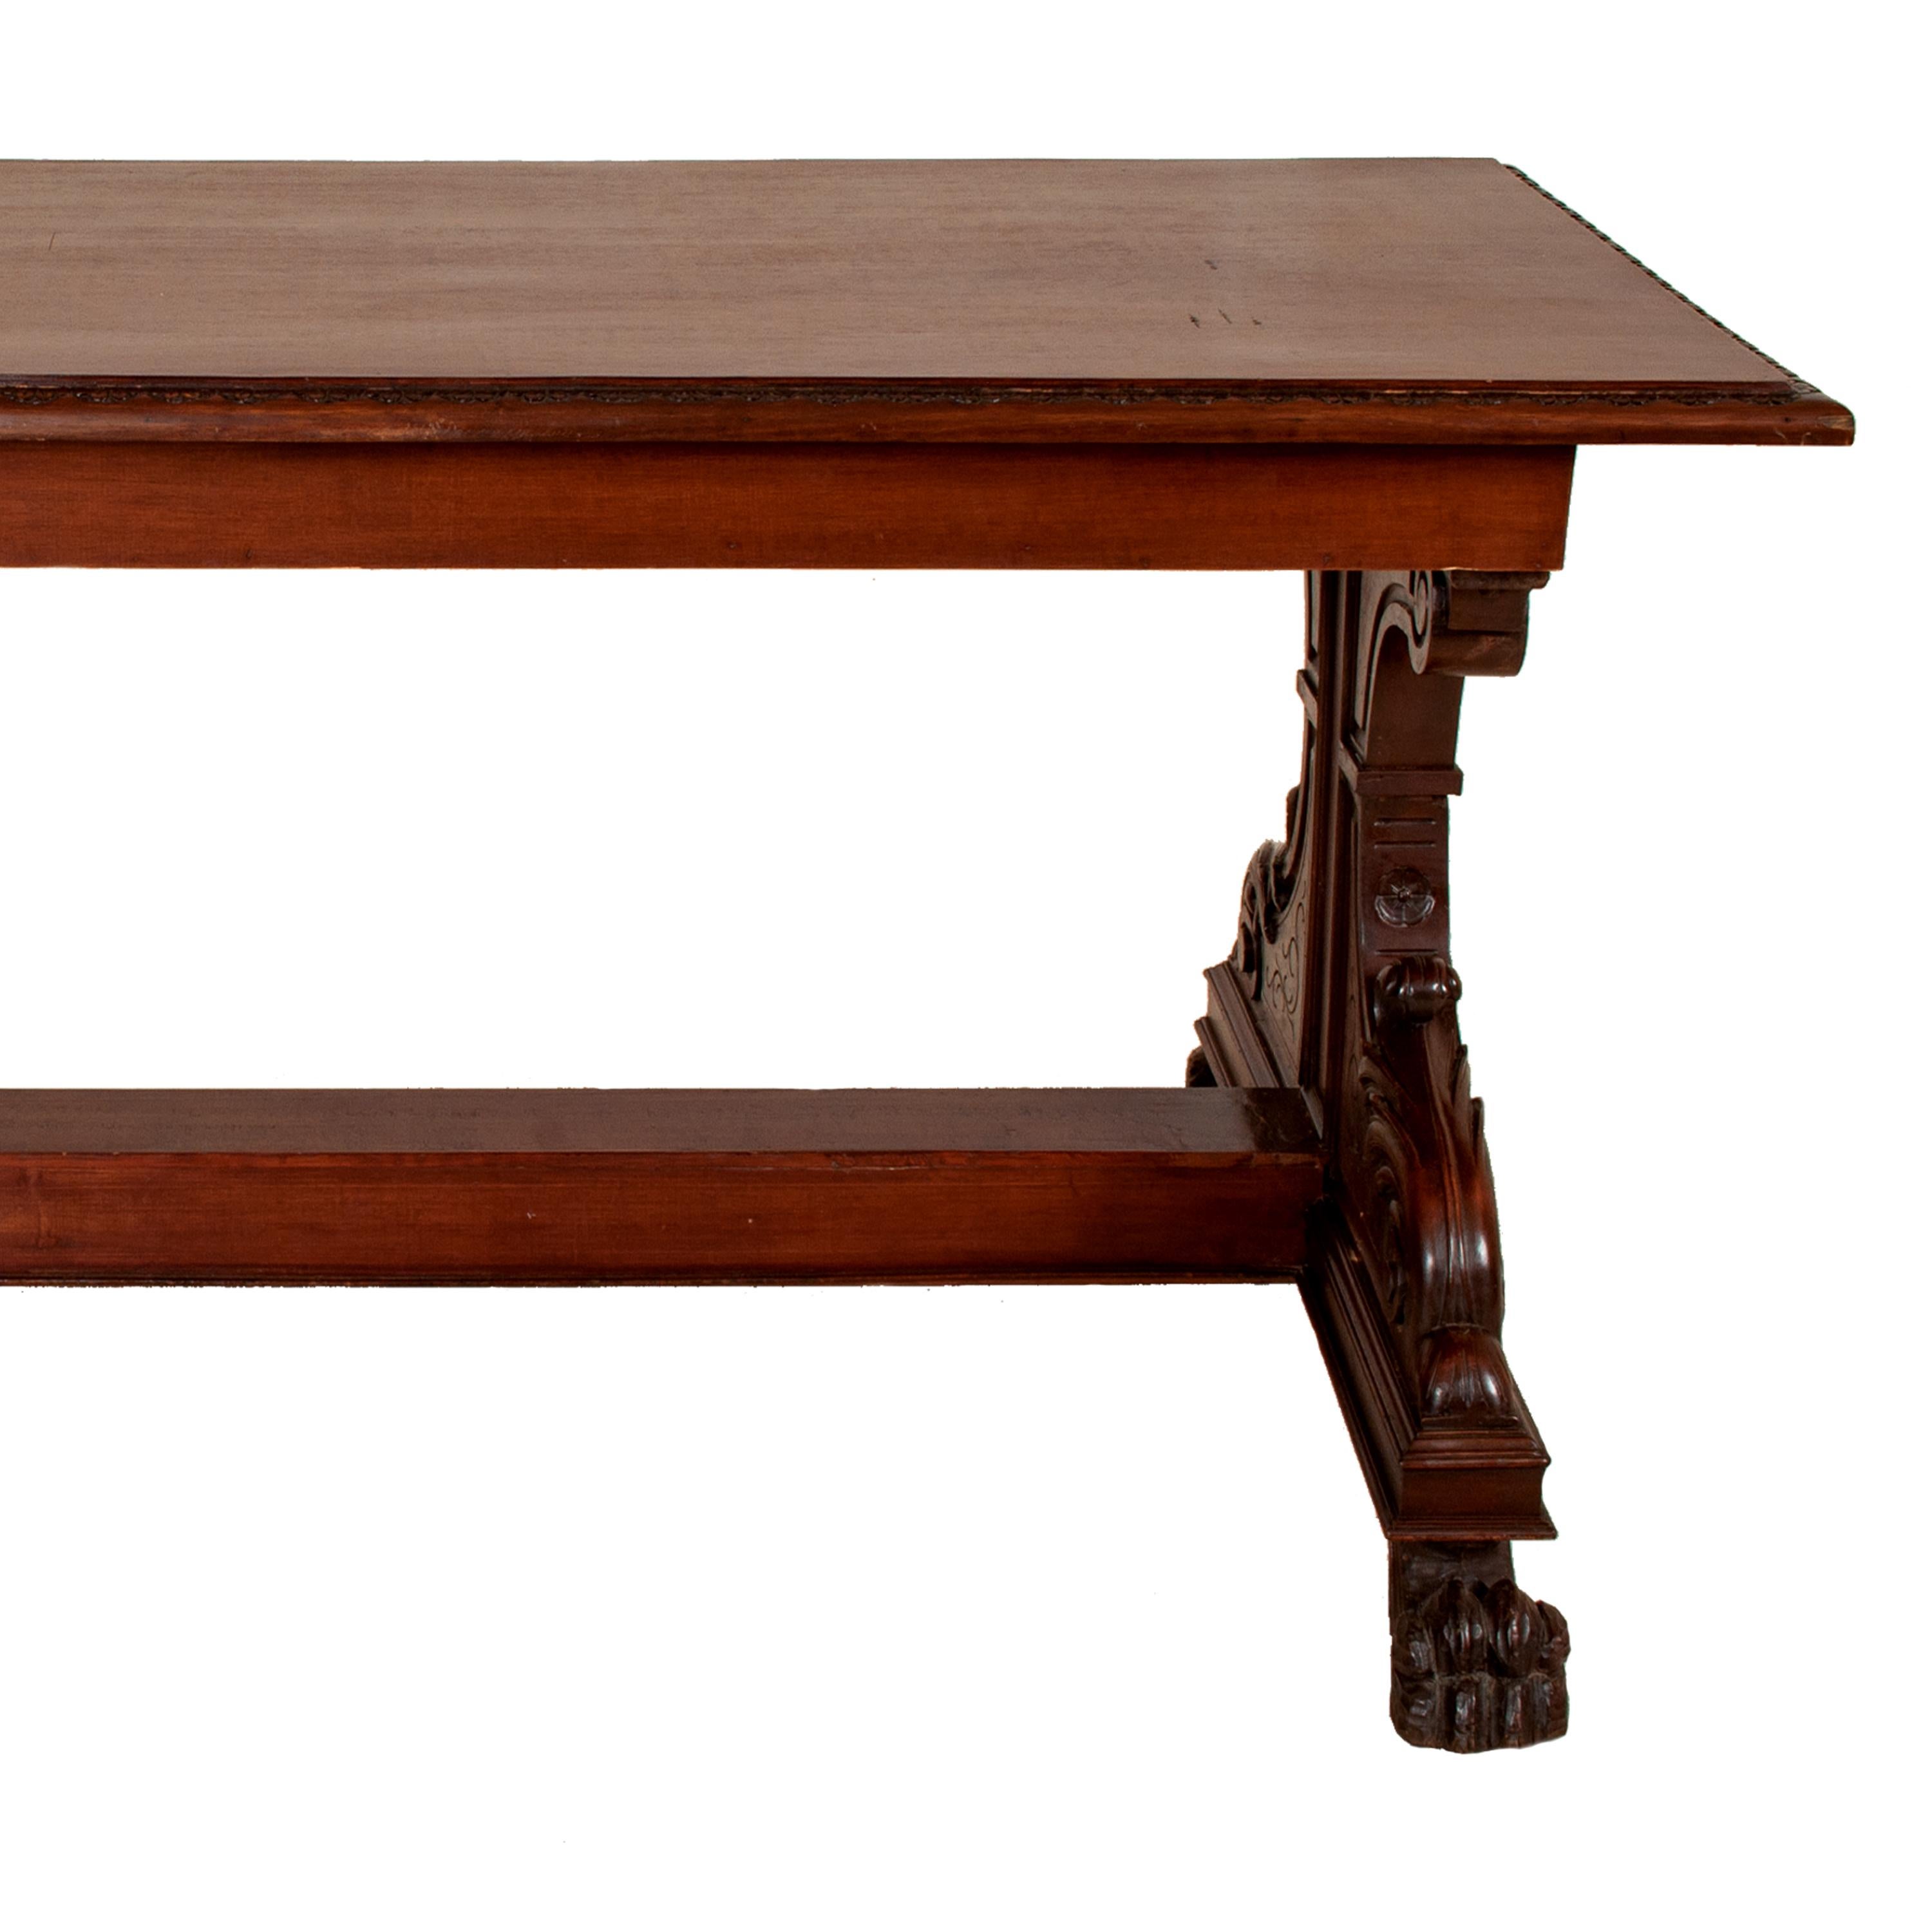 Antique Italian Carved Walnut Renaissance Revival Library Serving Table, 1870 For Sale 5